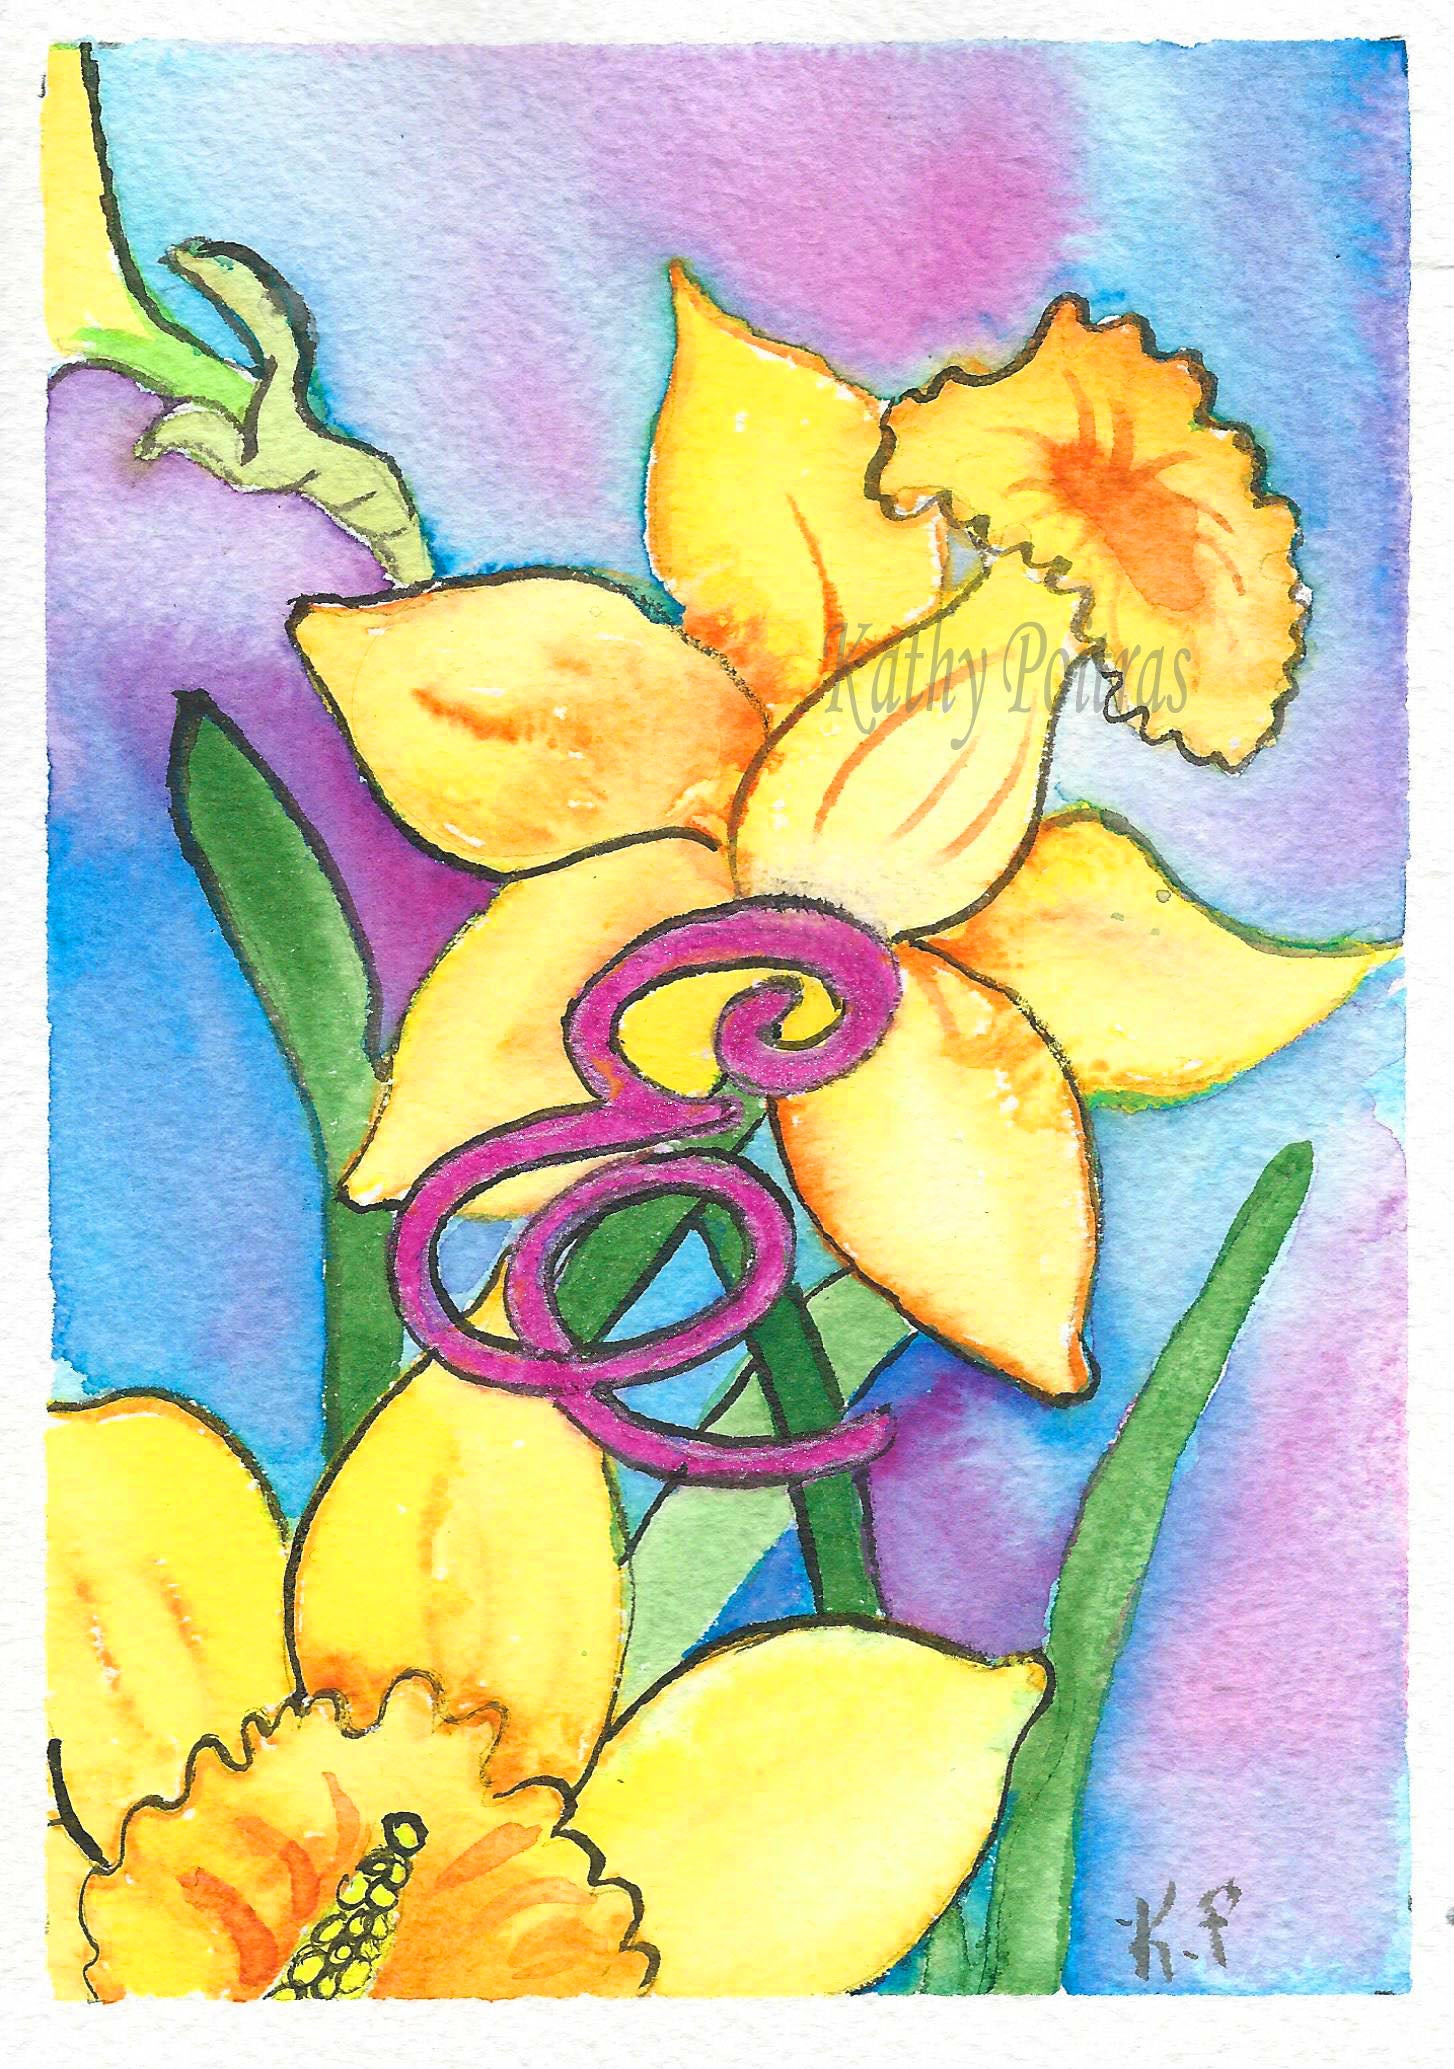 Personalized Letter E Birthday Card, Mother's Day Card, of Daffodils